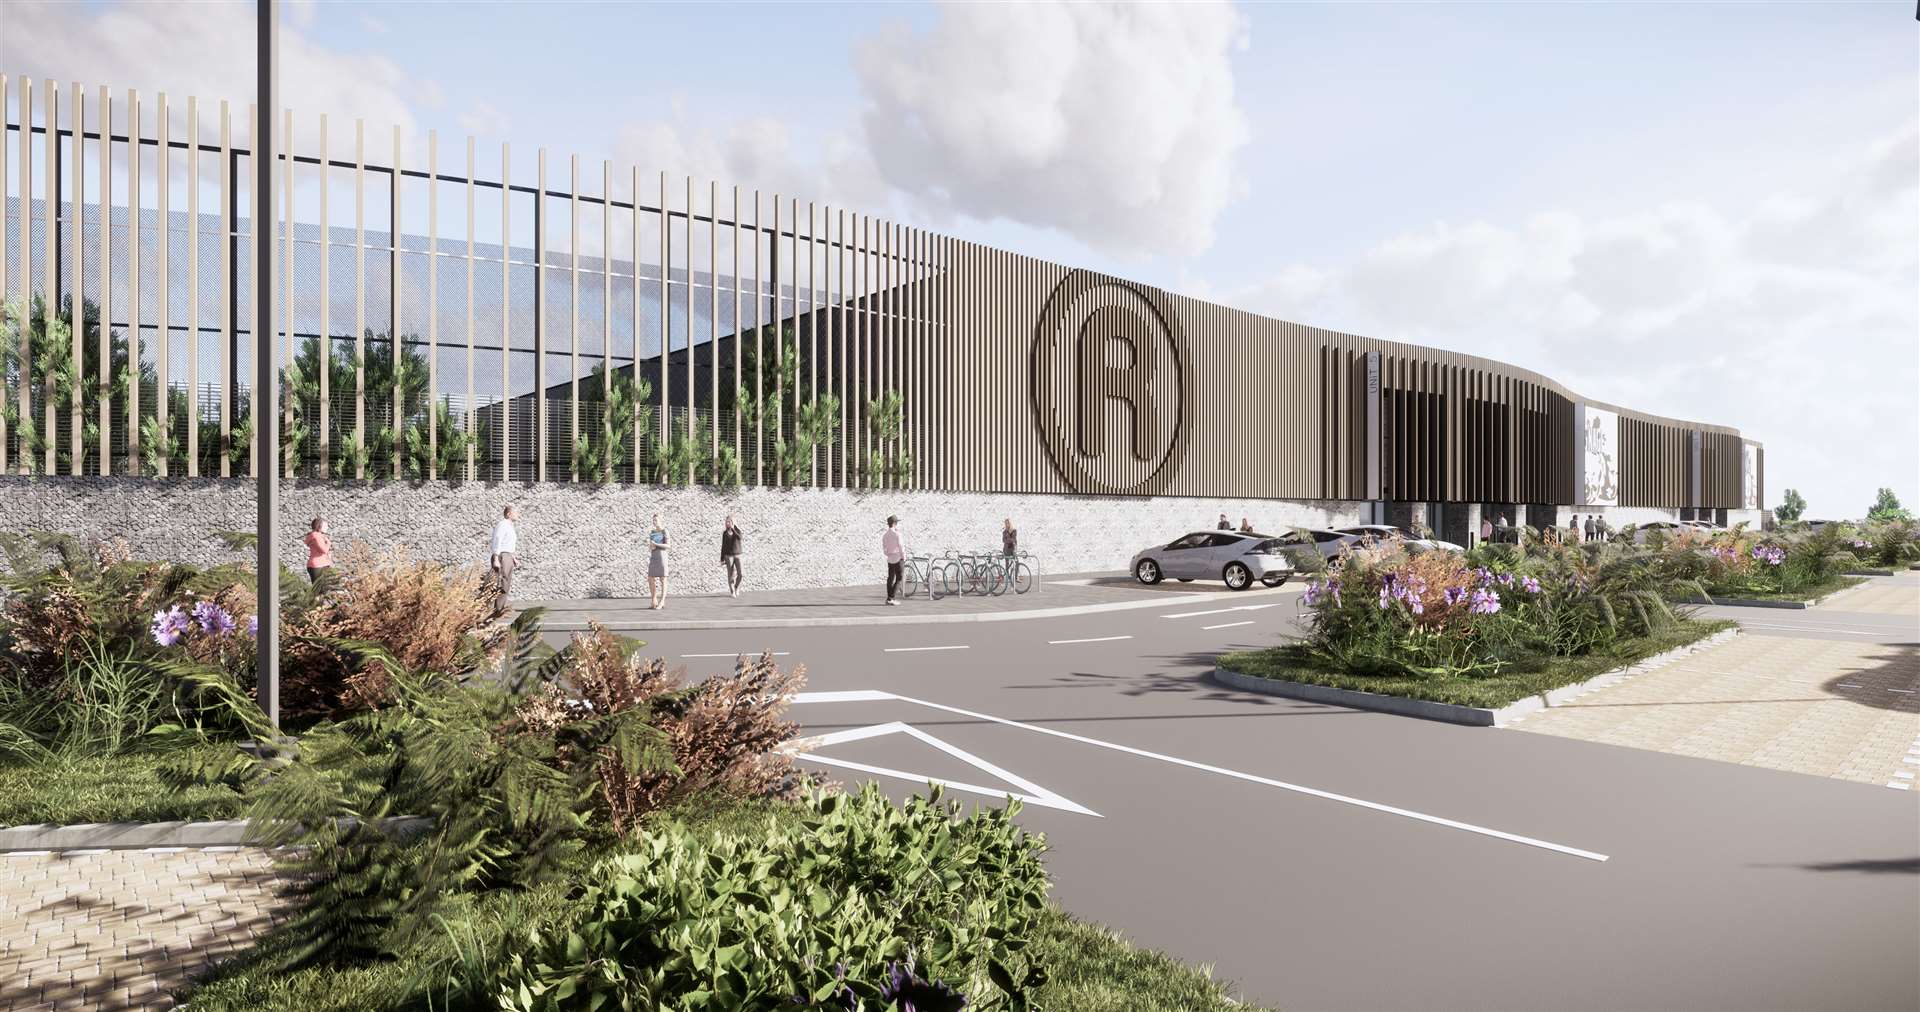 The Range store in Ashford is expected to open in 2020